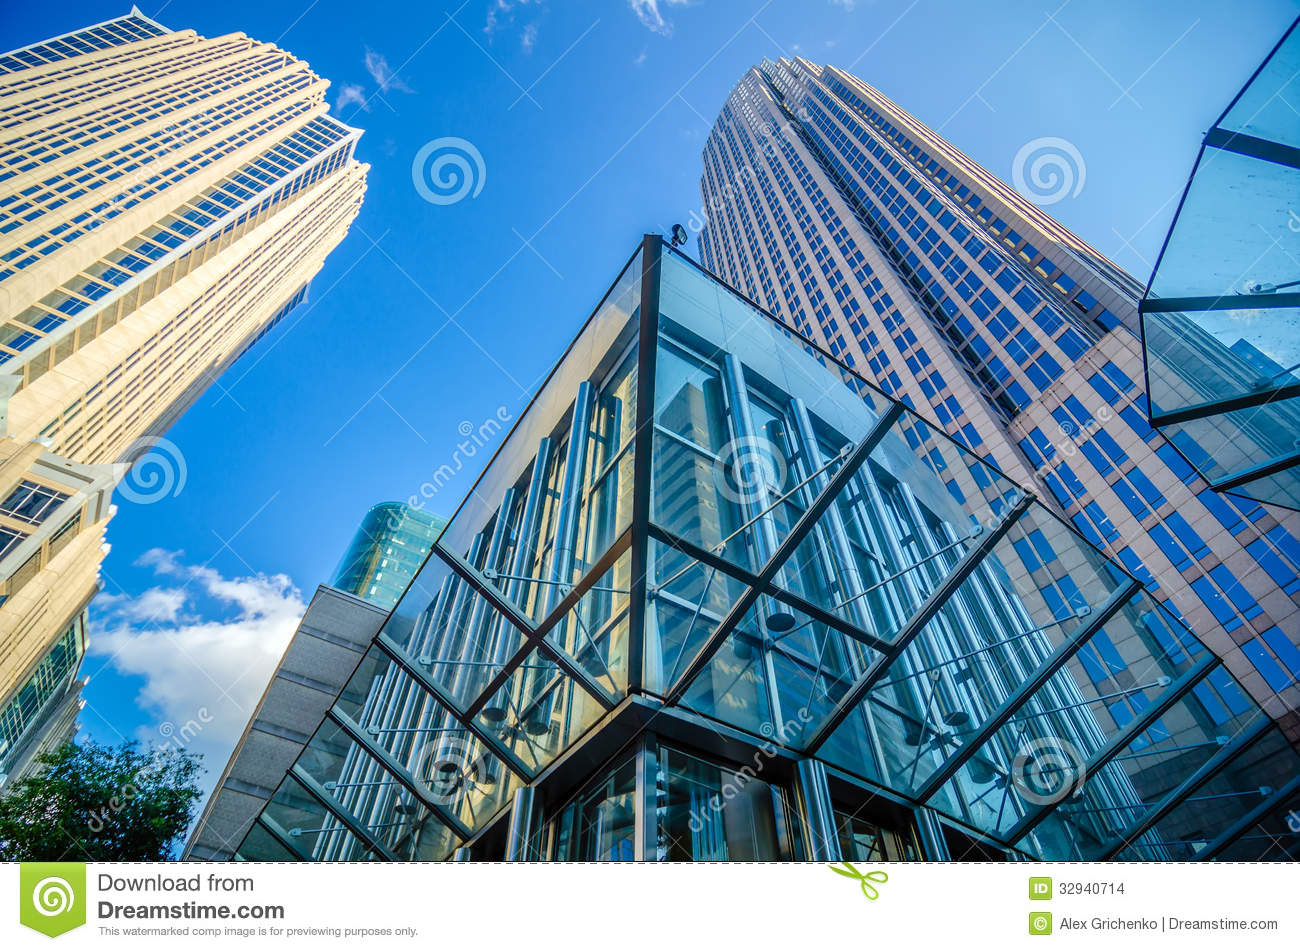 Skyline And City Streets Of Charlotte Stock Images   Image  32940714